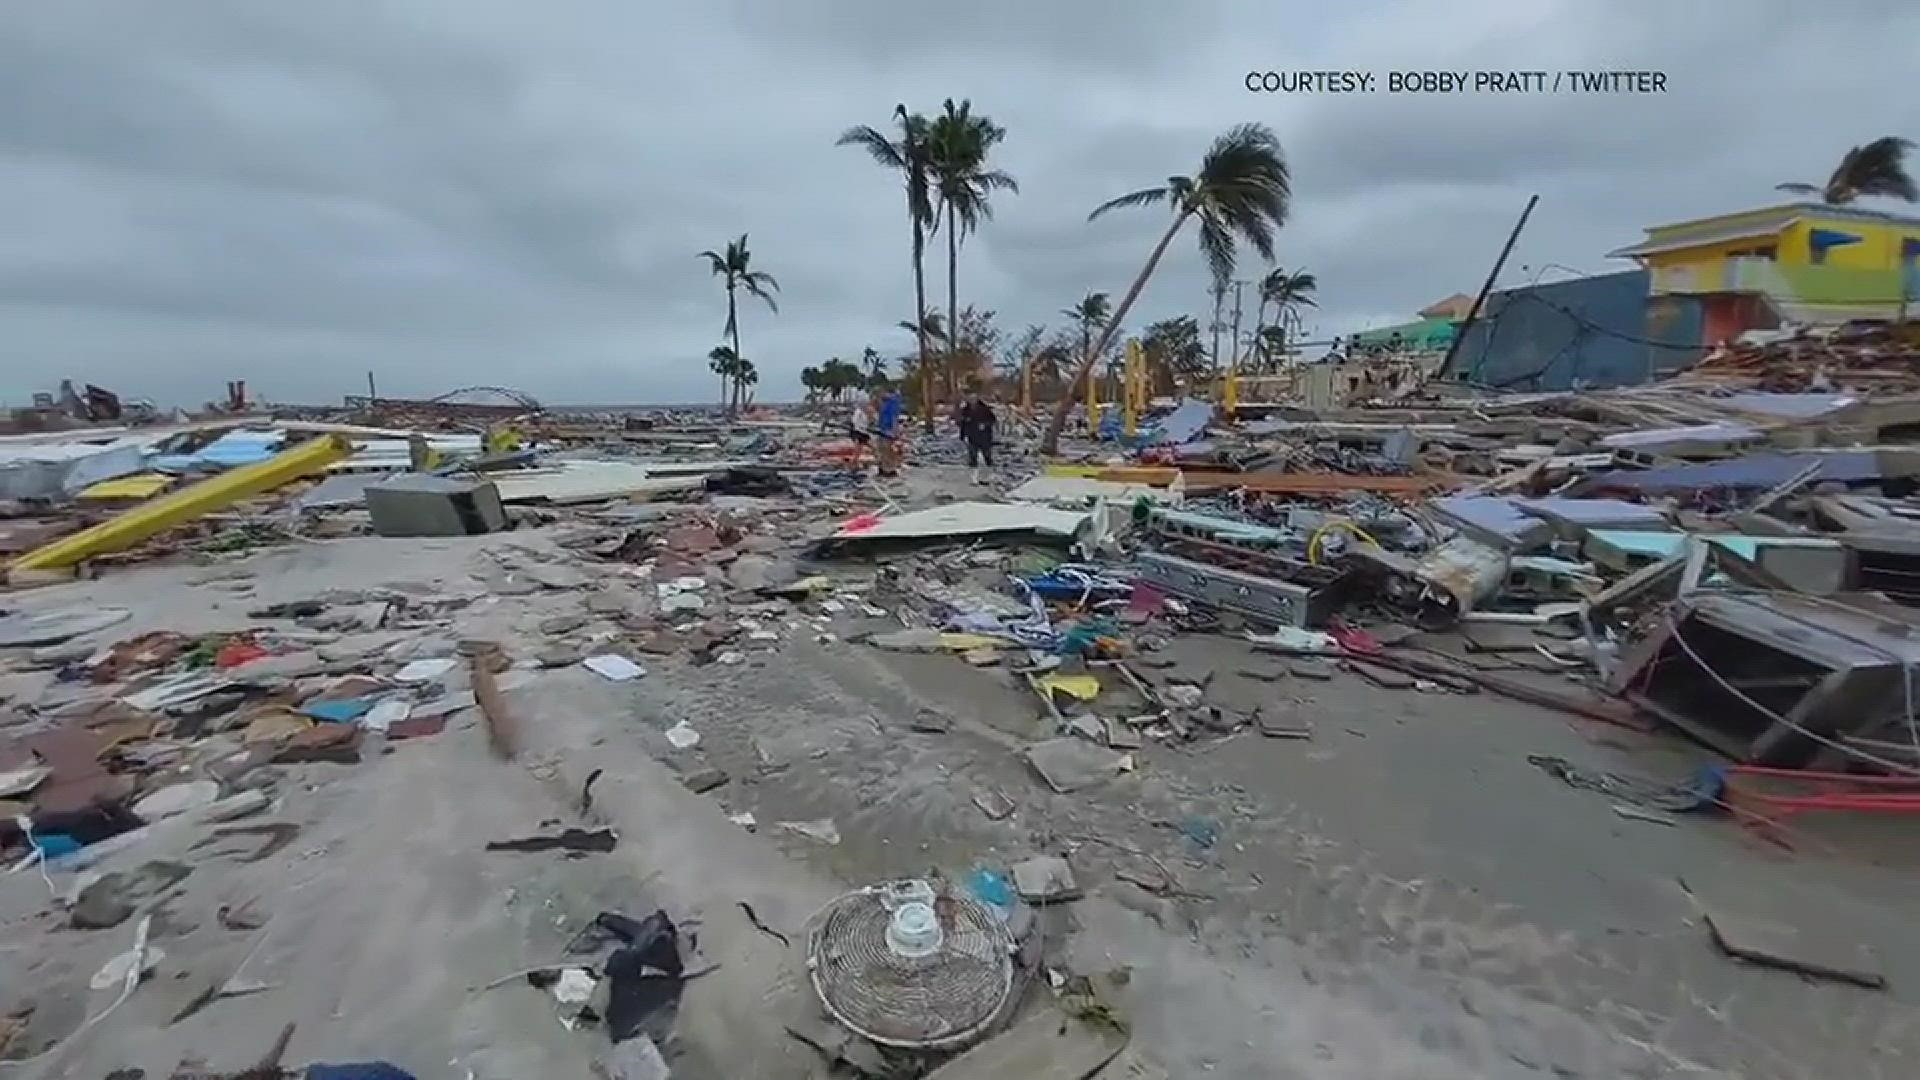 Video shot by Bobby Pratt shows Ft. Meyers in the aftermath of Hurricane Ian.